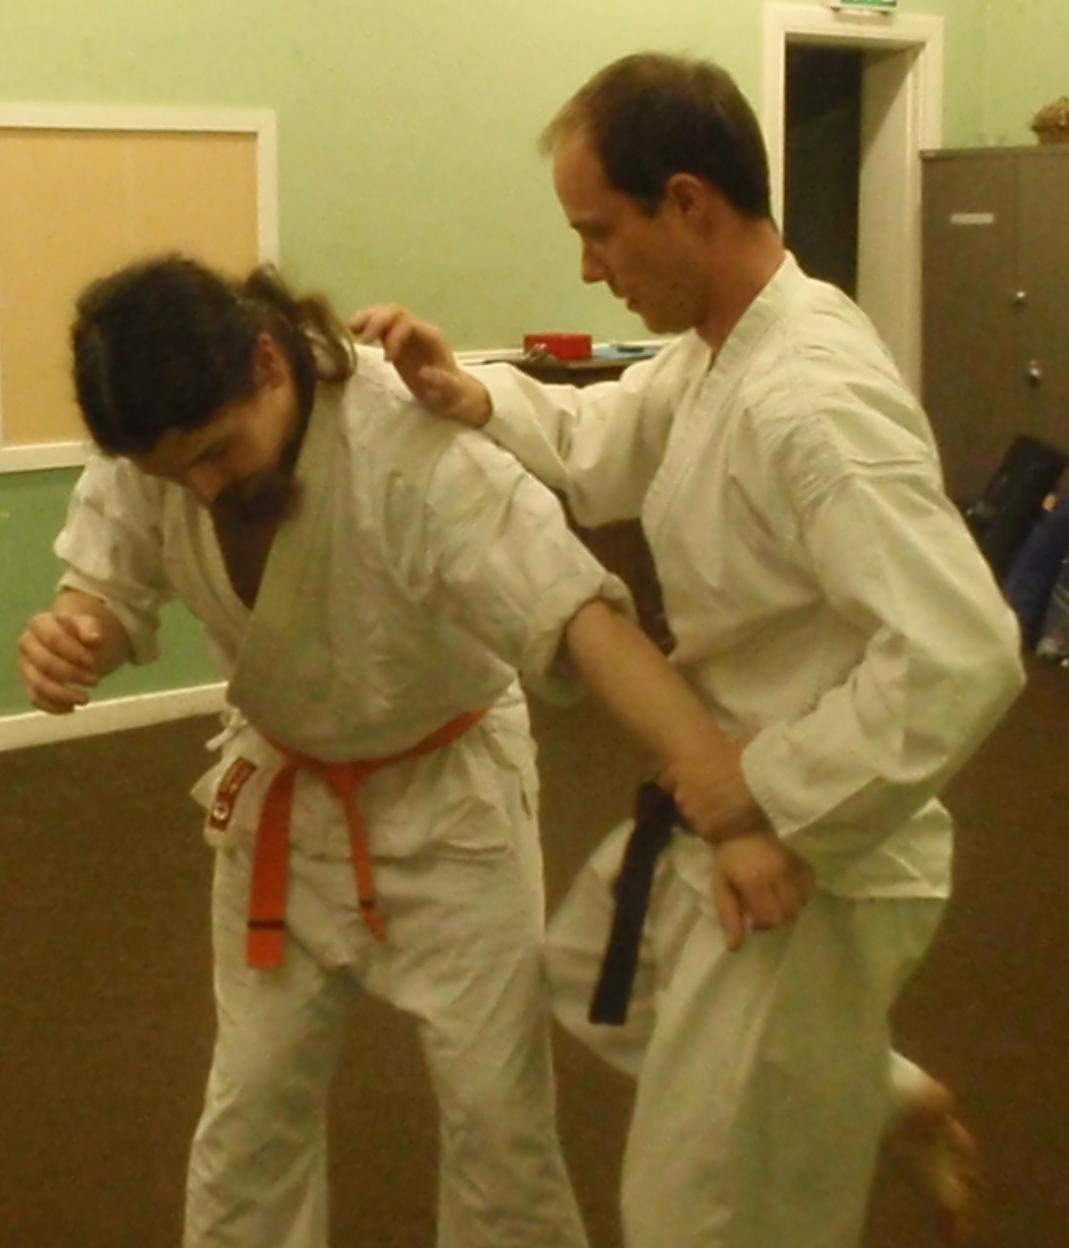 Even if it misses the kyusho point, a knee strike to the thigh works well